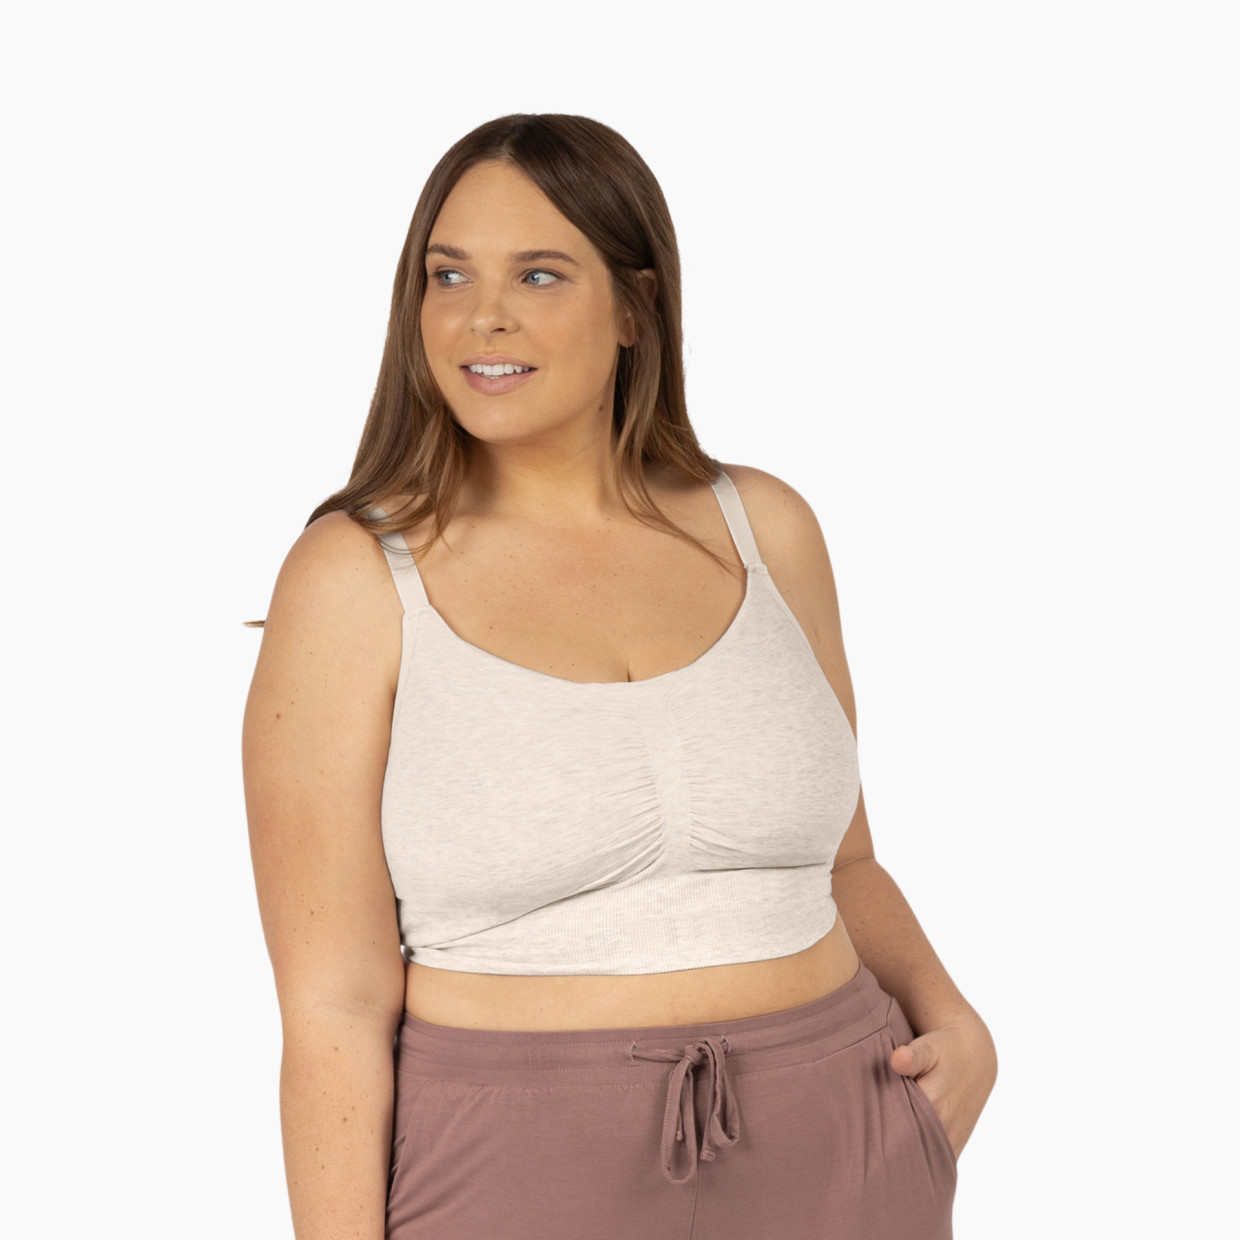 Kindred Bravely Sublime Bamboo Hands-Free Pumping Lounge & Sleep Bra - Oatmeal Heather, Xx-Large-Busty.